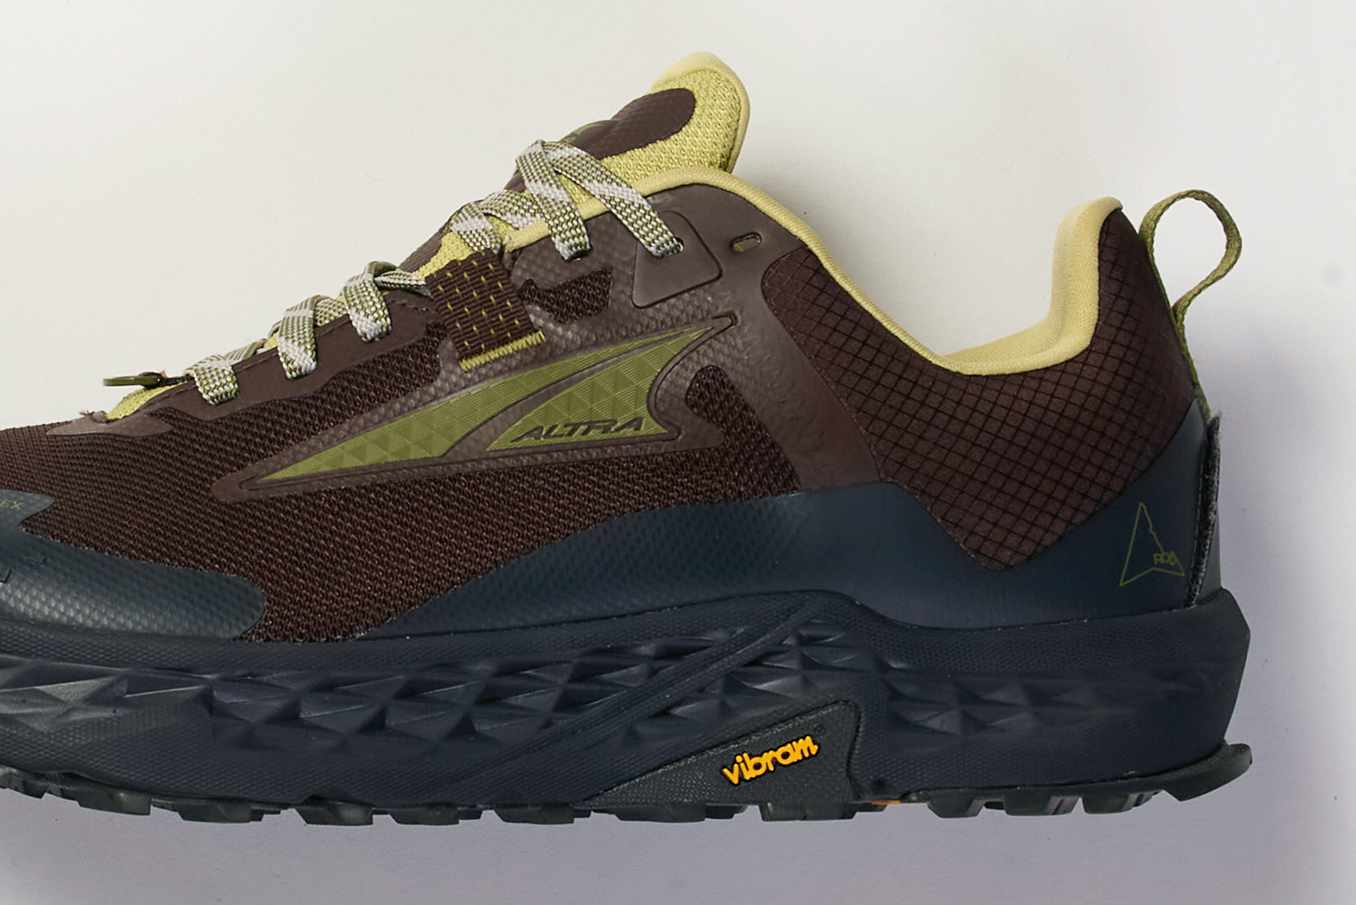 ROA & Alta's collaborative Timp 5 sneaker in green and brown colorway